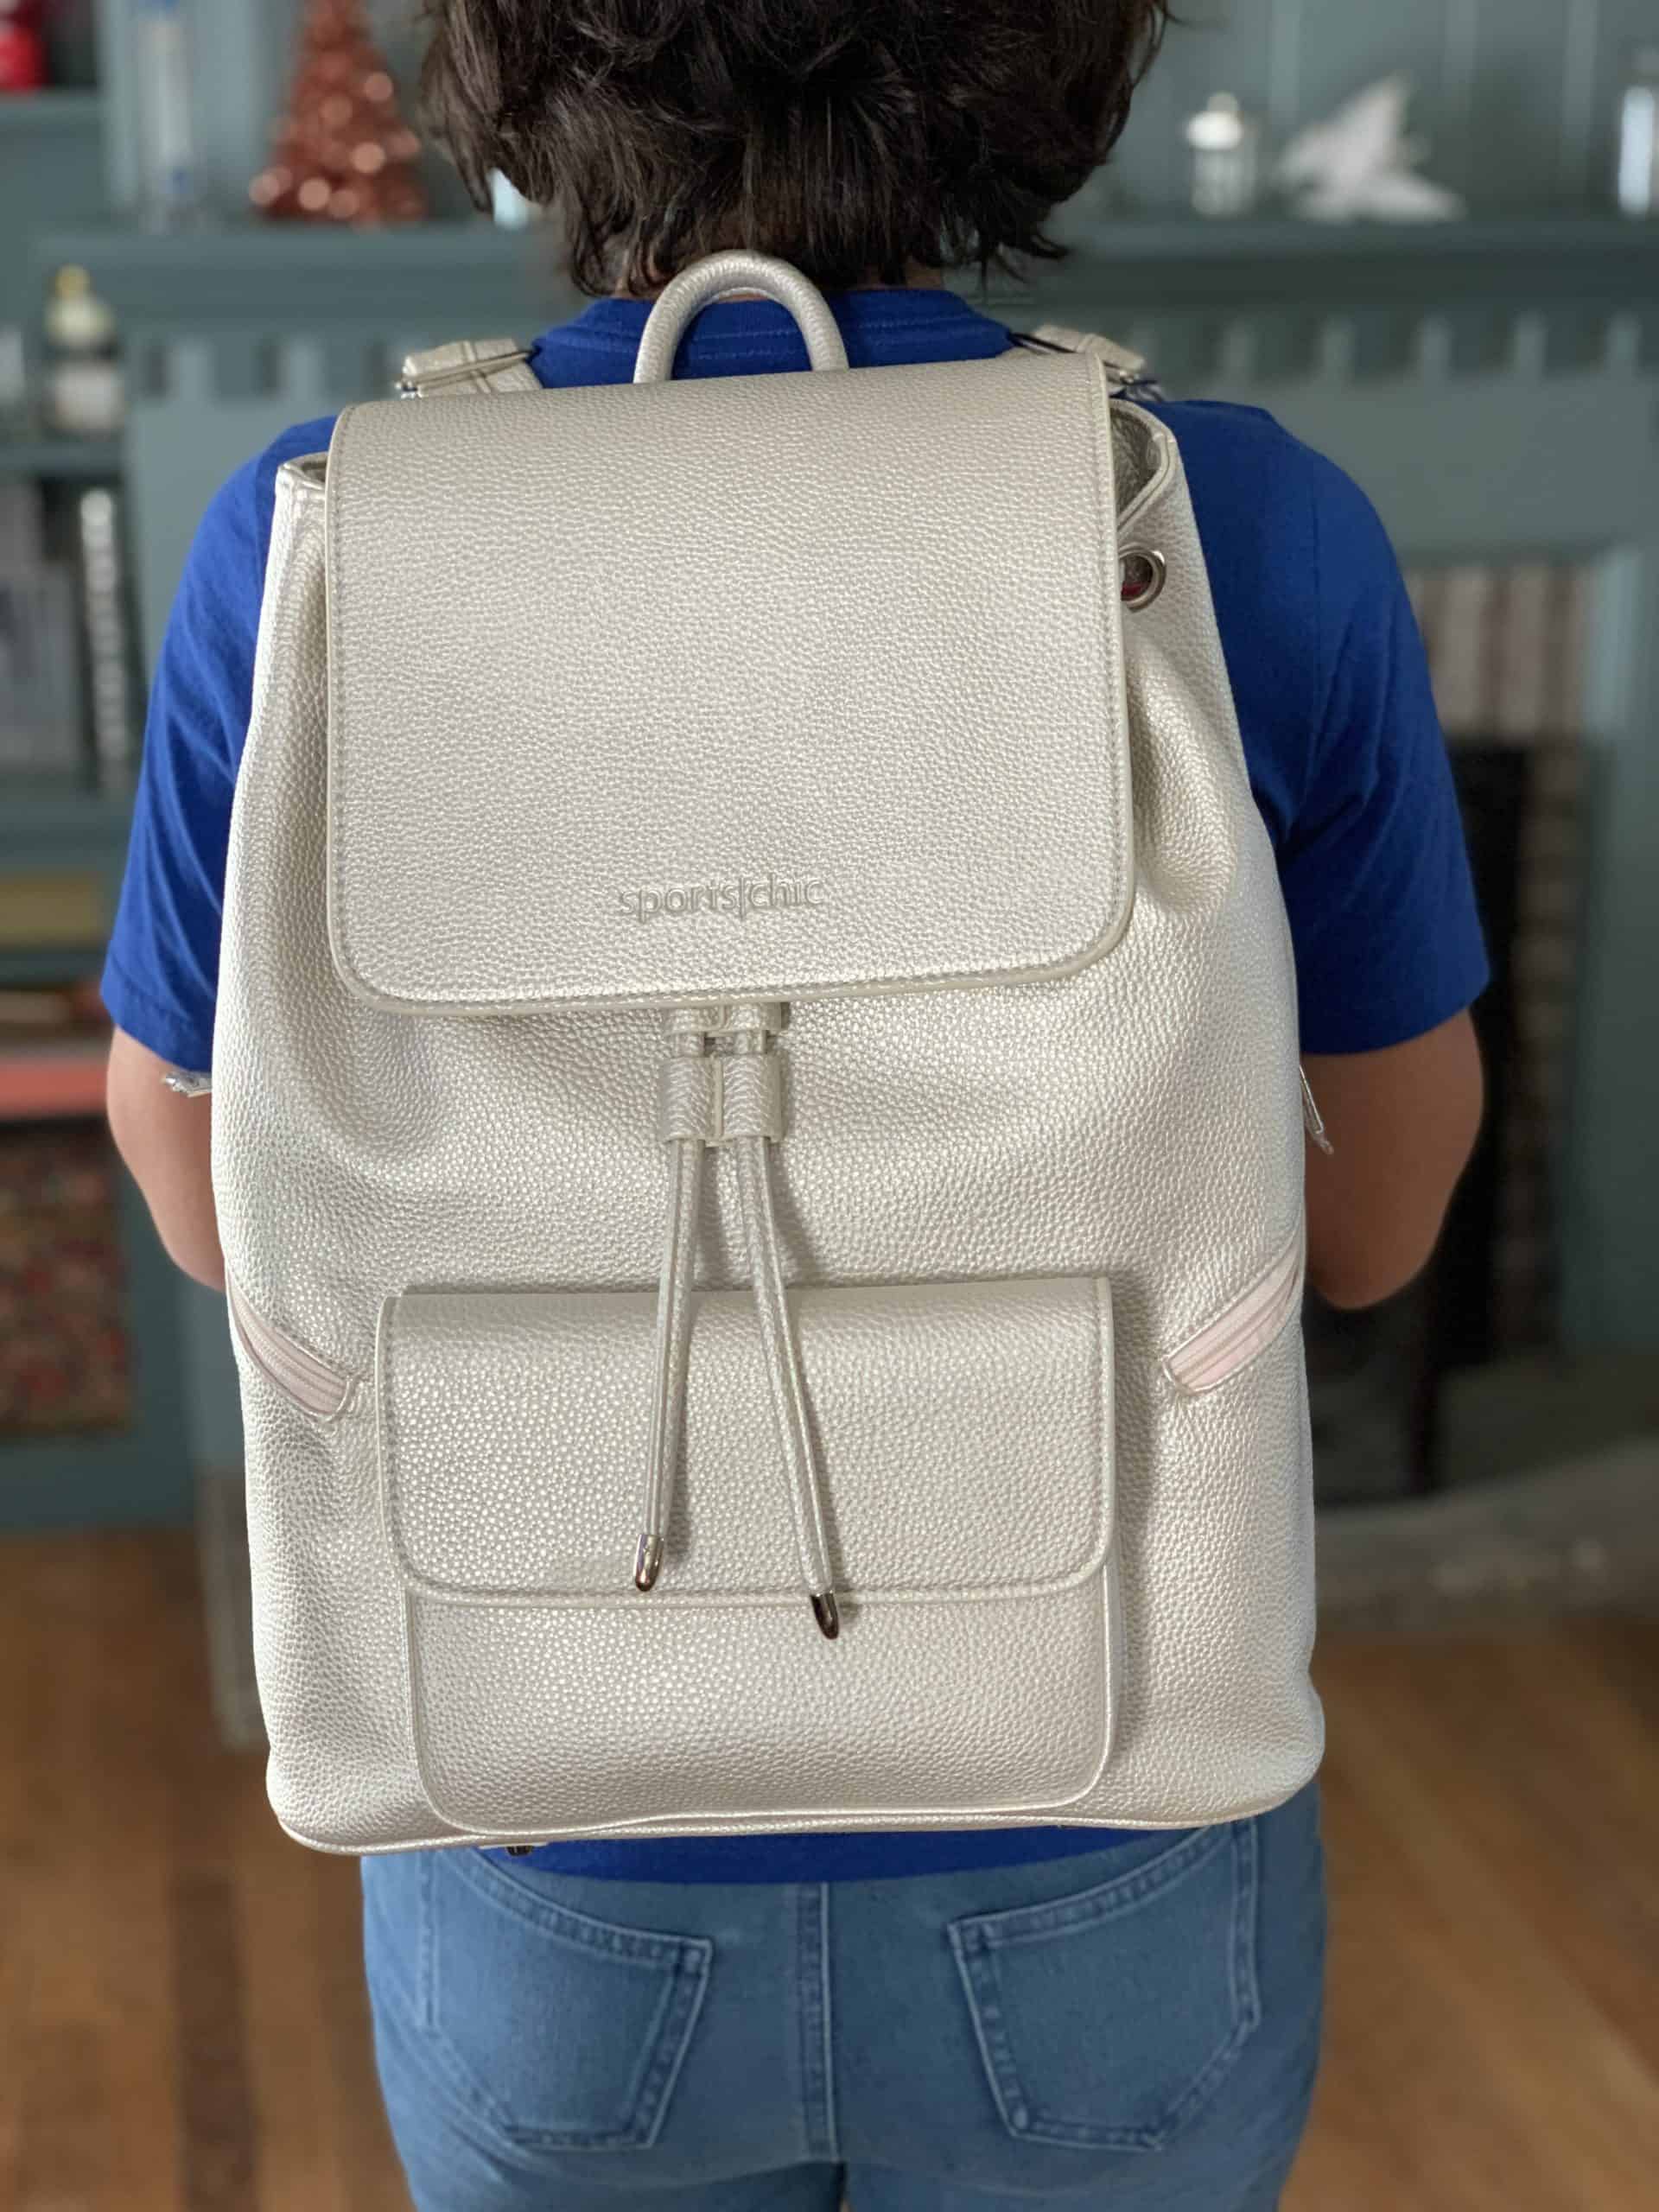 products to make your life easier in 2022 - sports chic backpack